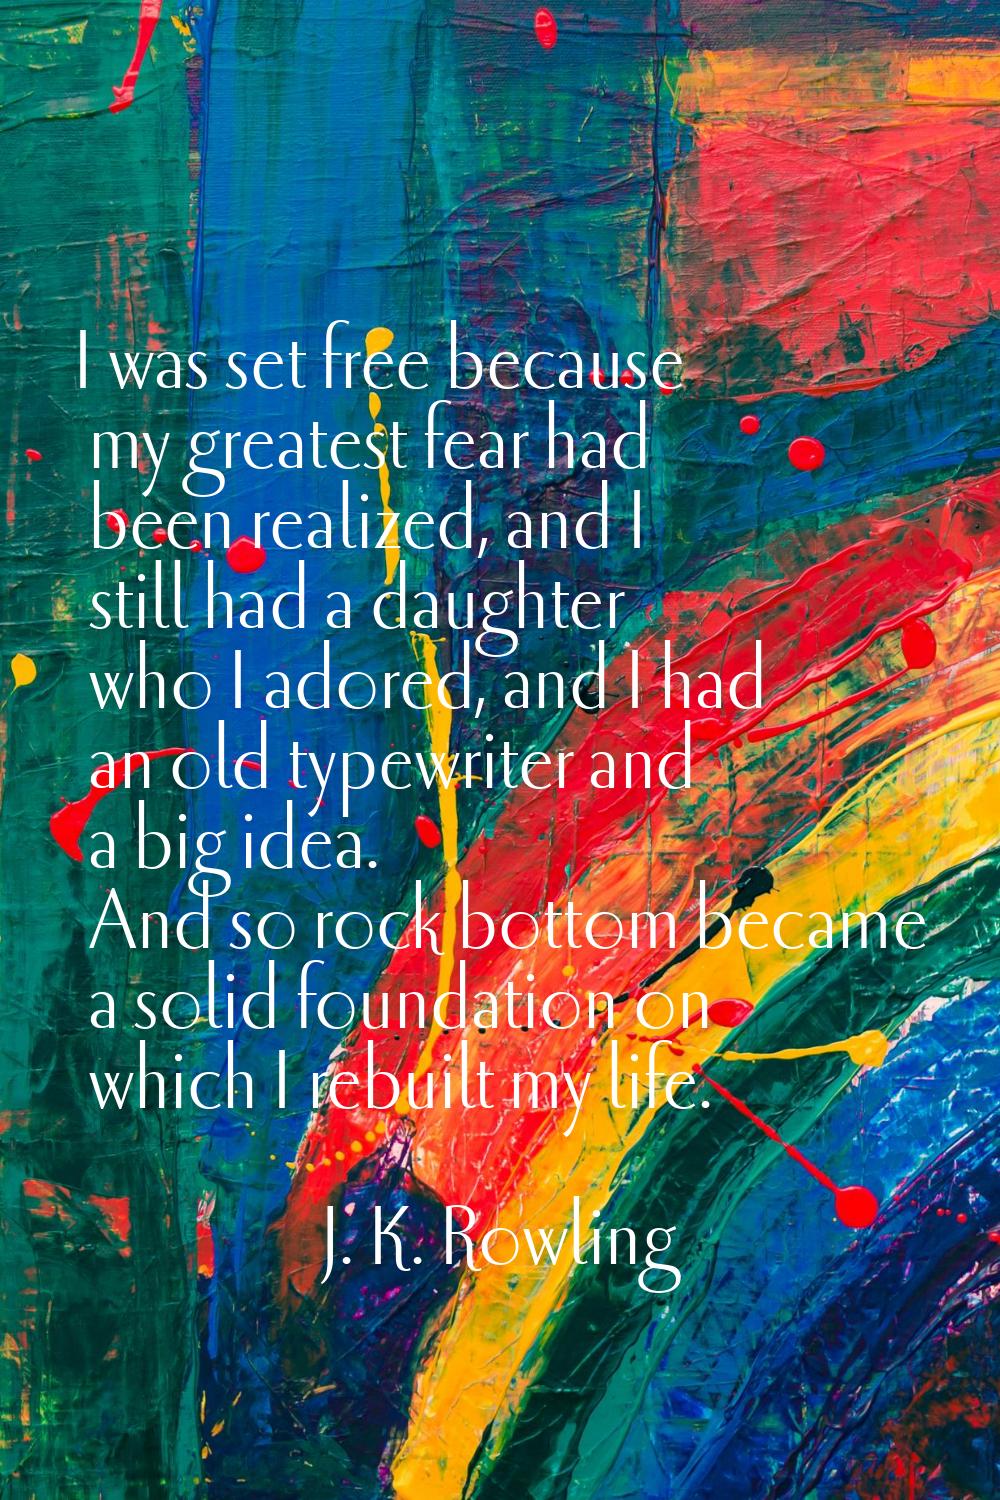 I was set free because my greatest fear had been realized, and I still had a daughter who I adored,